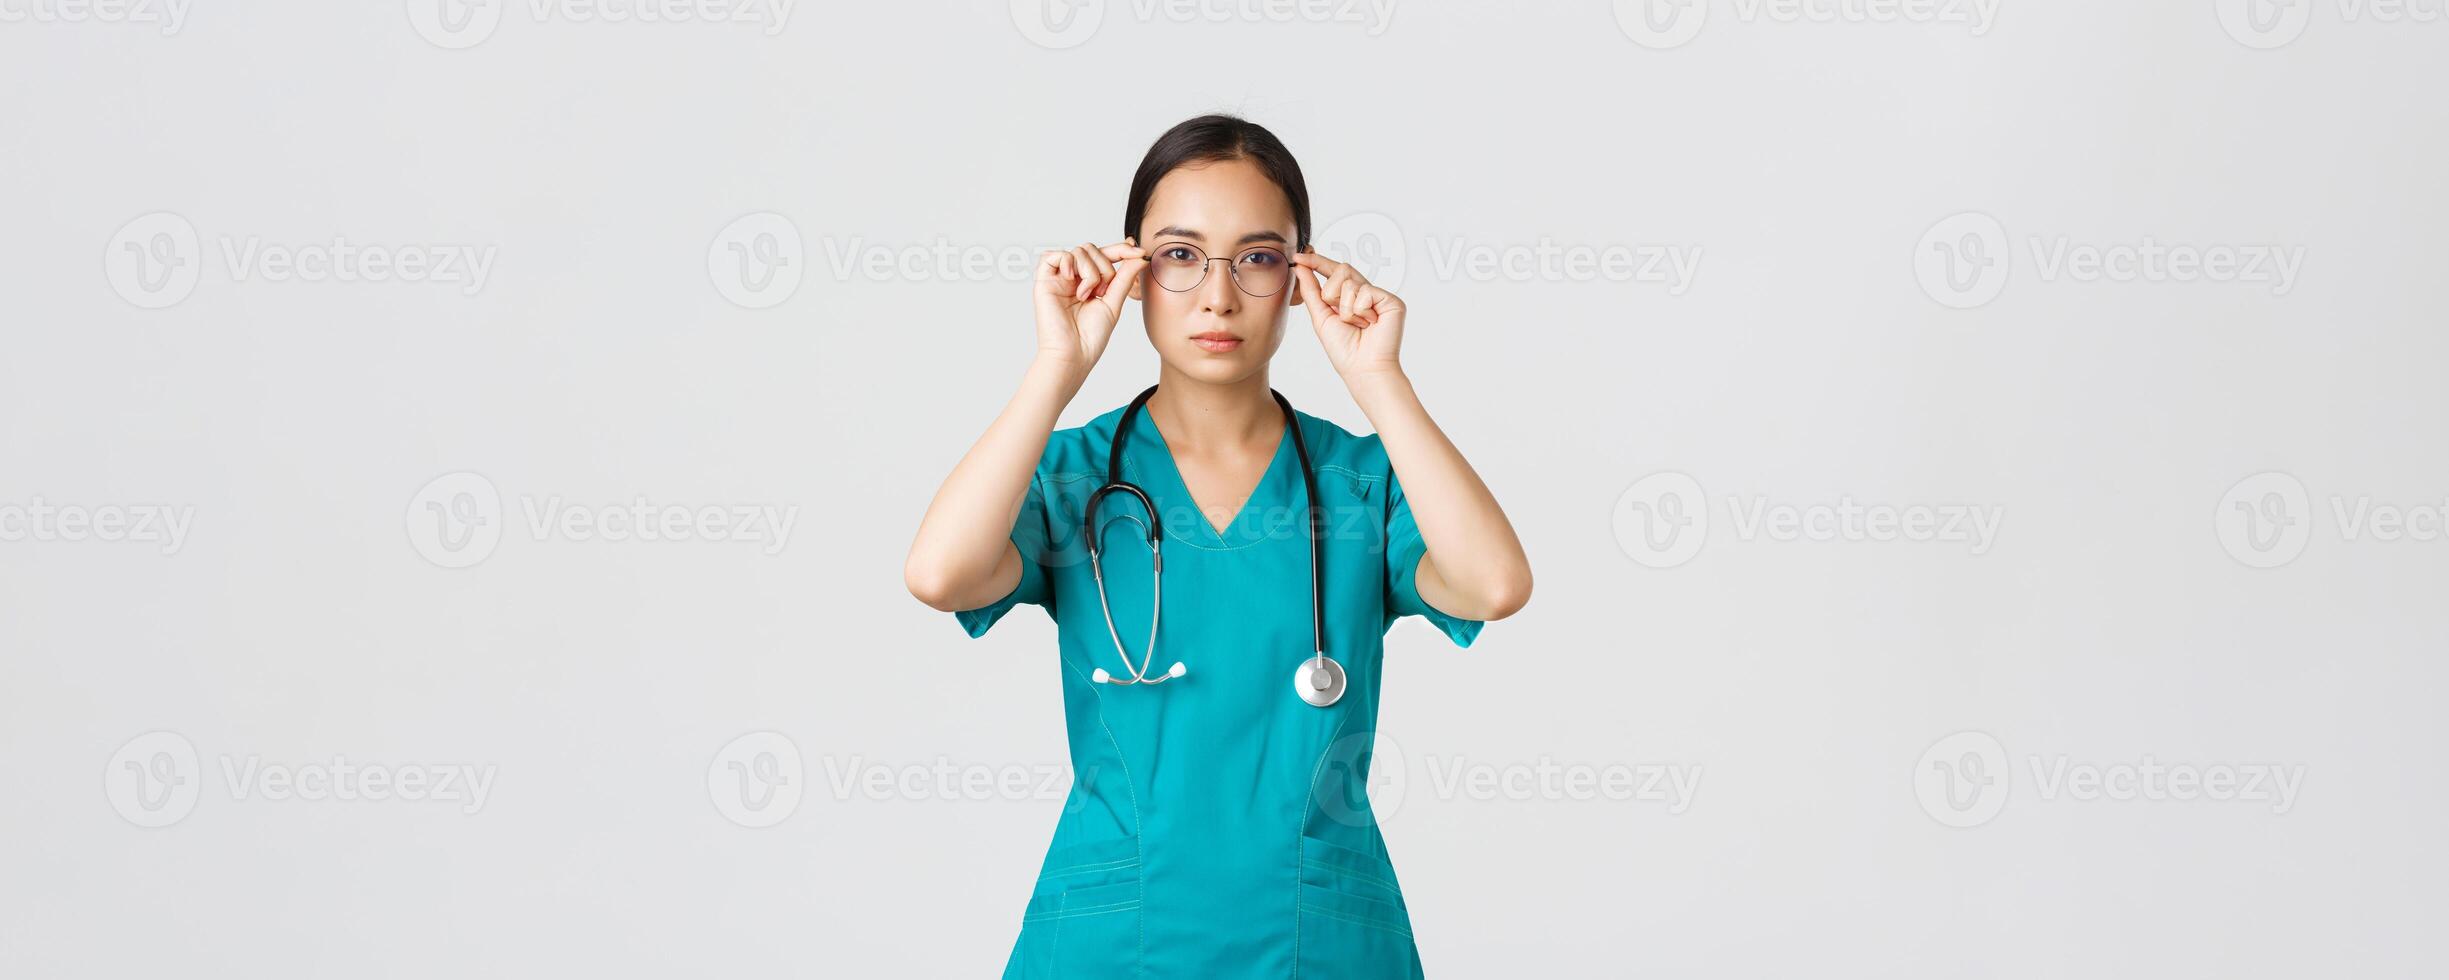 Covid-19, healthcare workers, pandemic concept. Confident serious-looking and determined asian female doctor, nurse in scrubs put on glasses, ready for shift in emergency room, white background photo